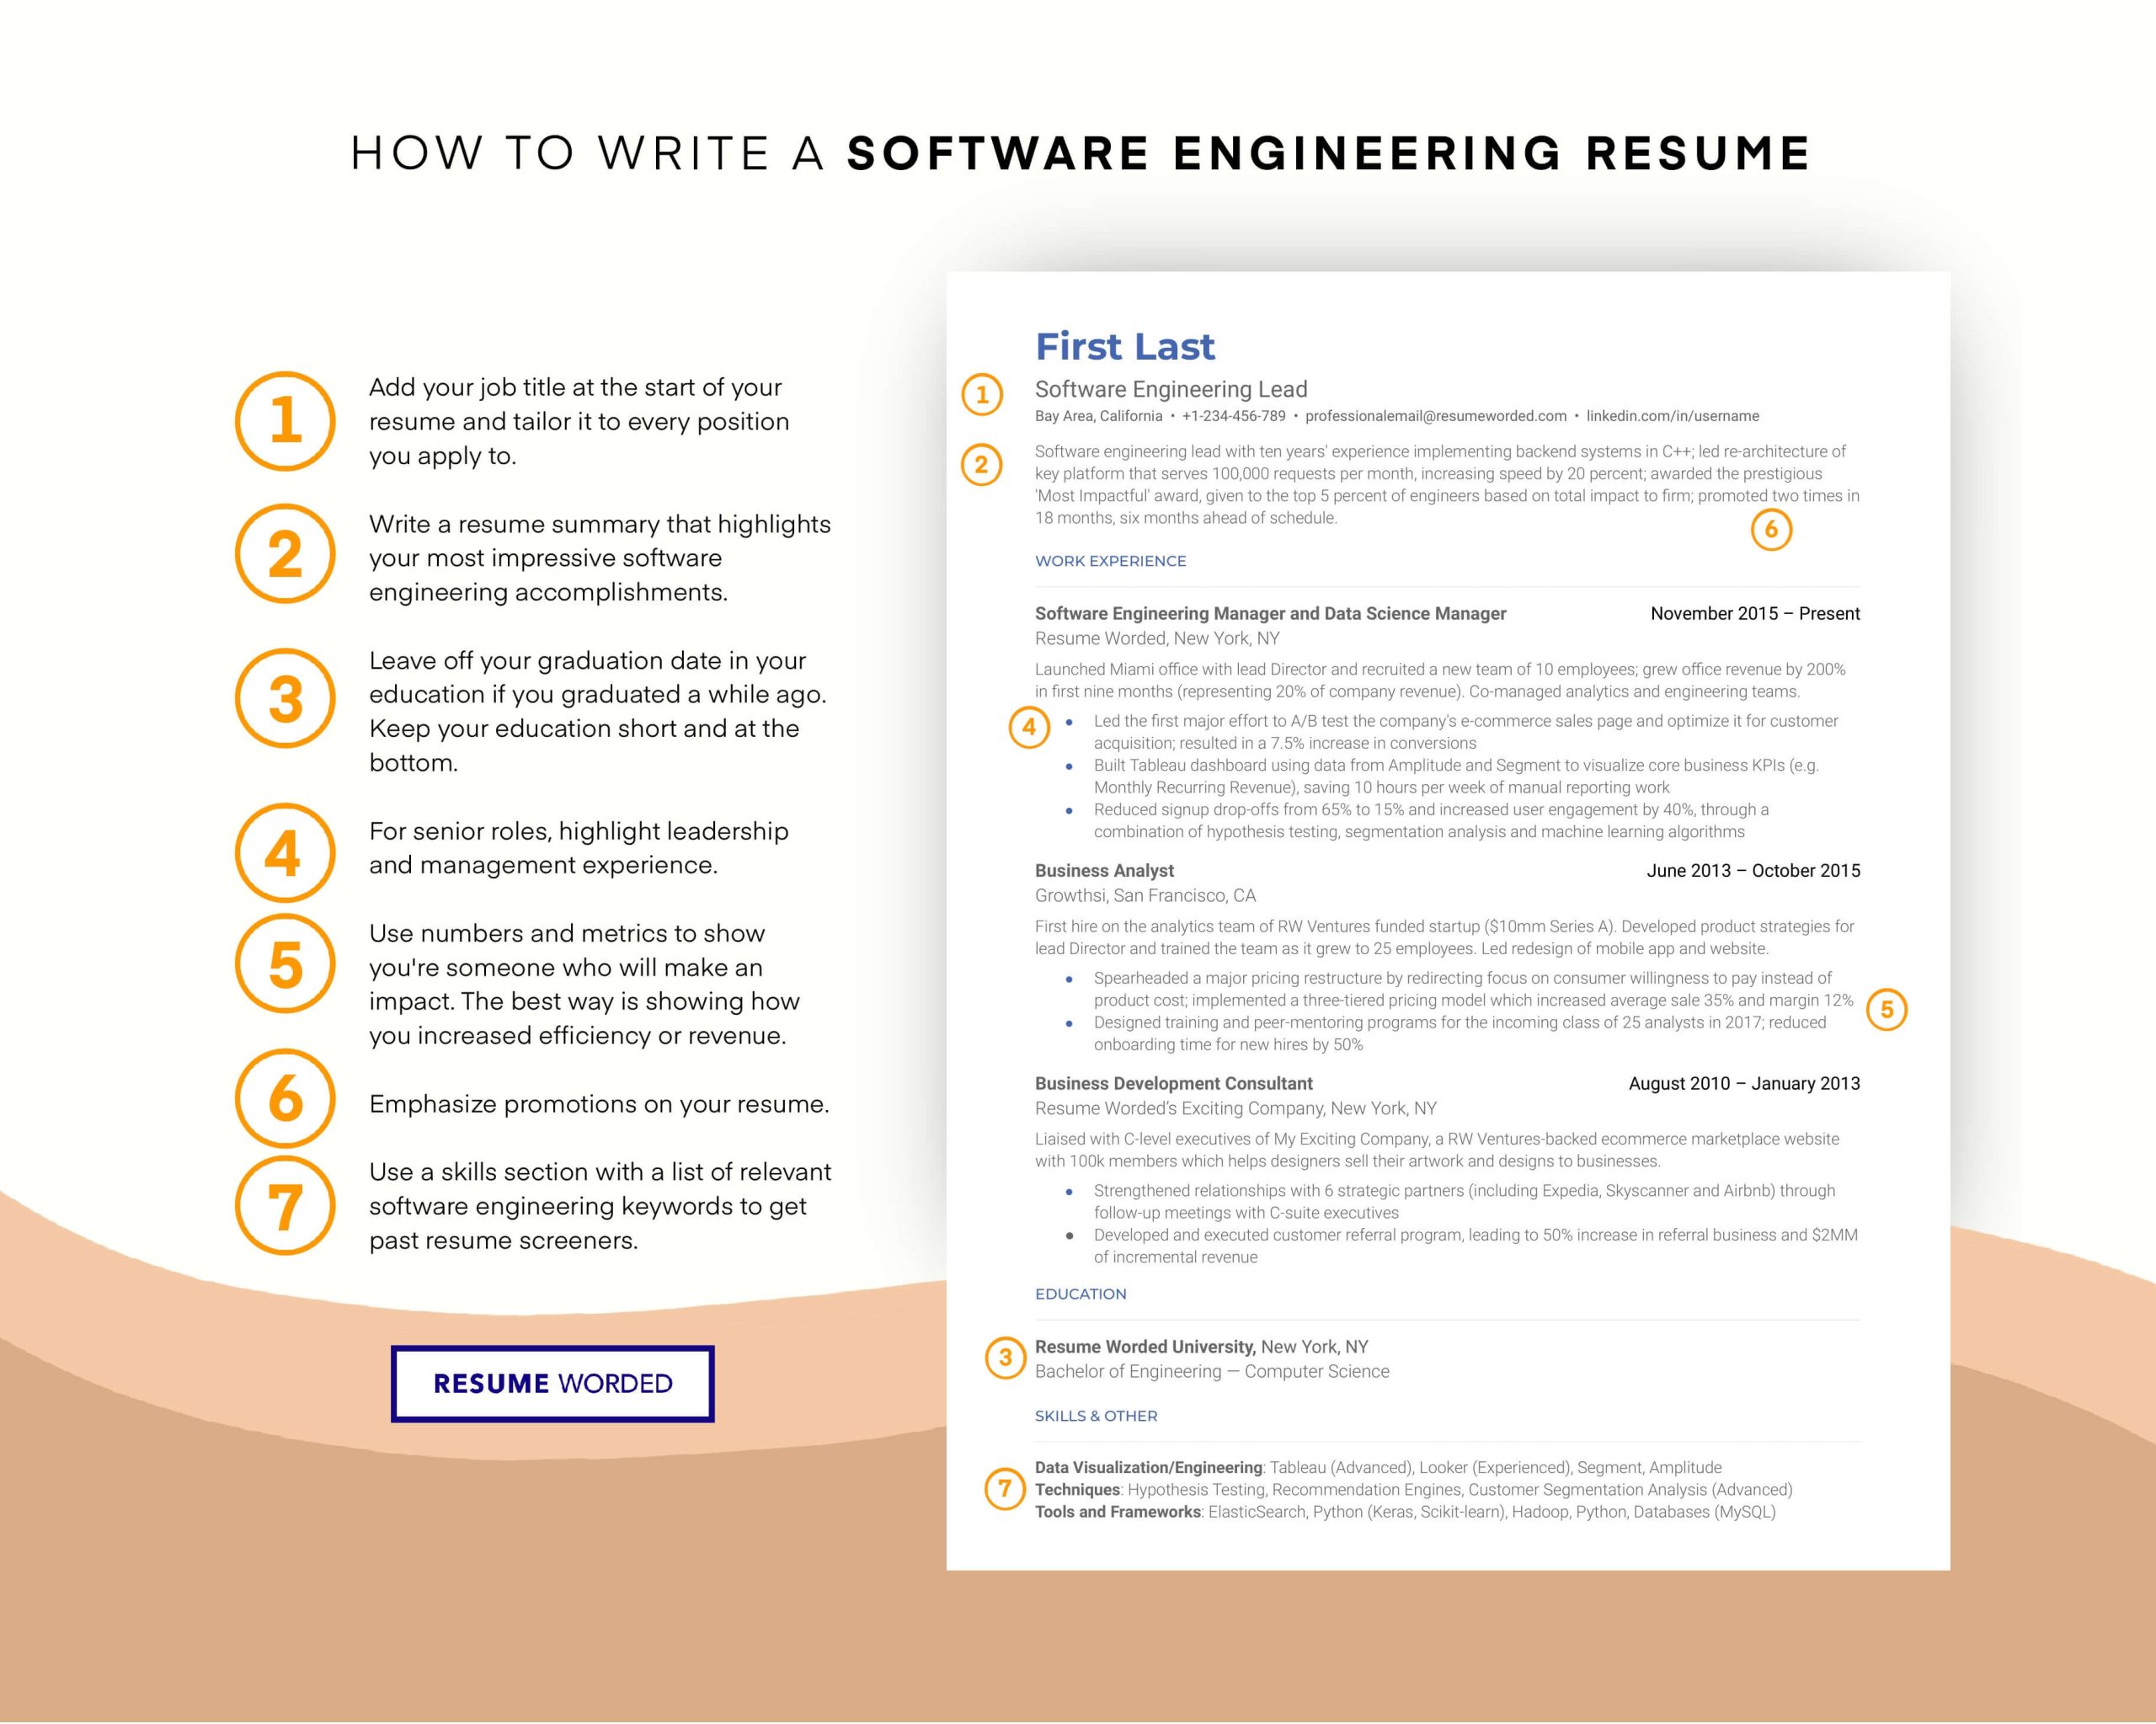 7 Years Devops Resume Samples Roles and Responsibilities 6 Devops Resume Examples for 2022 Resume Worded